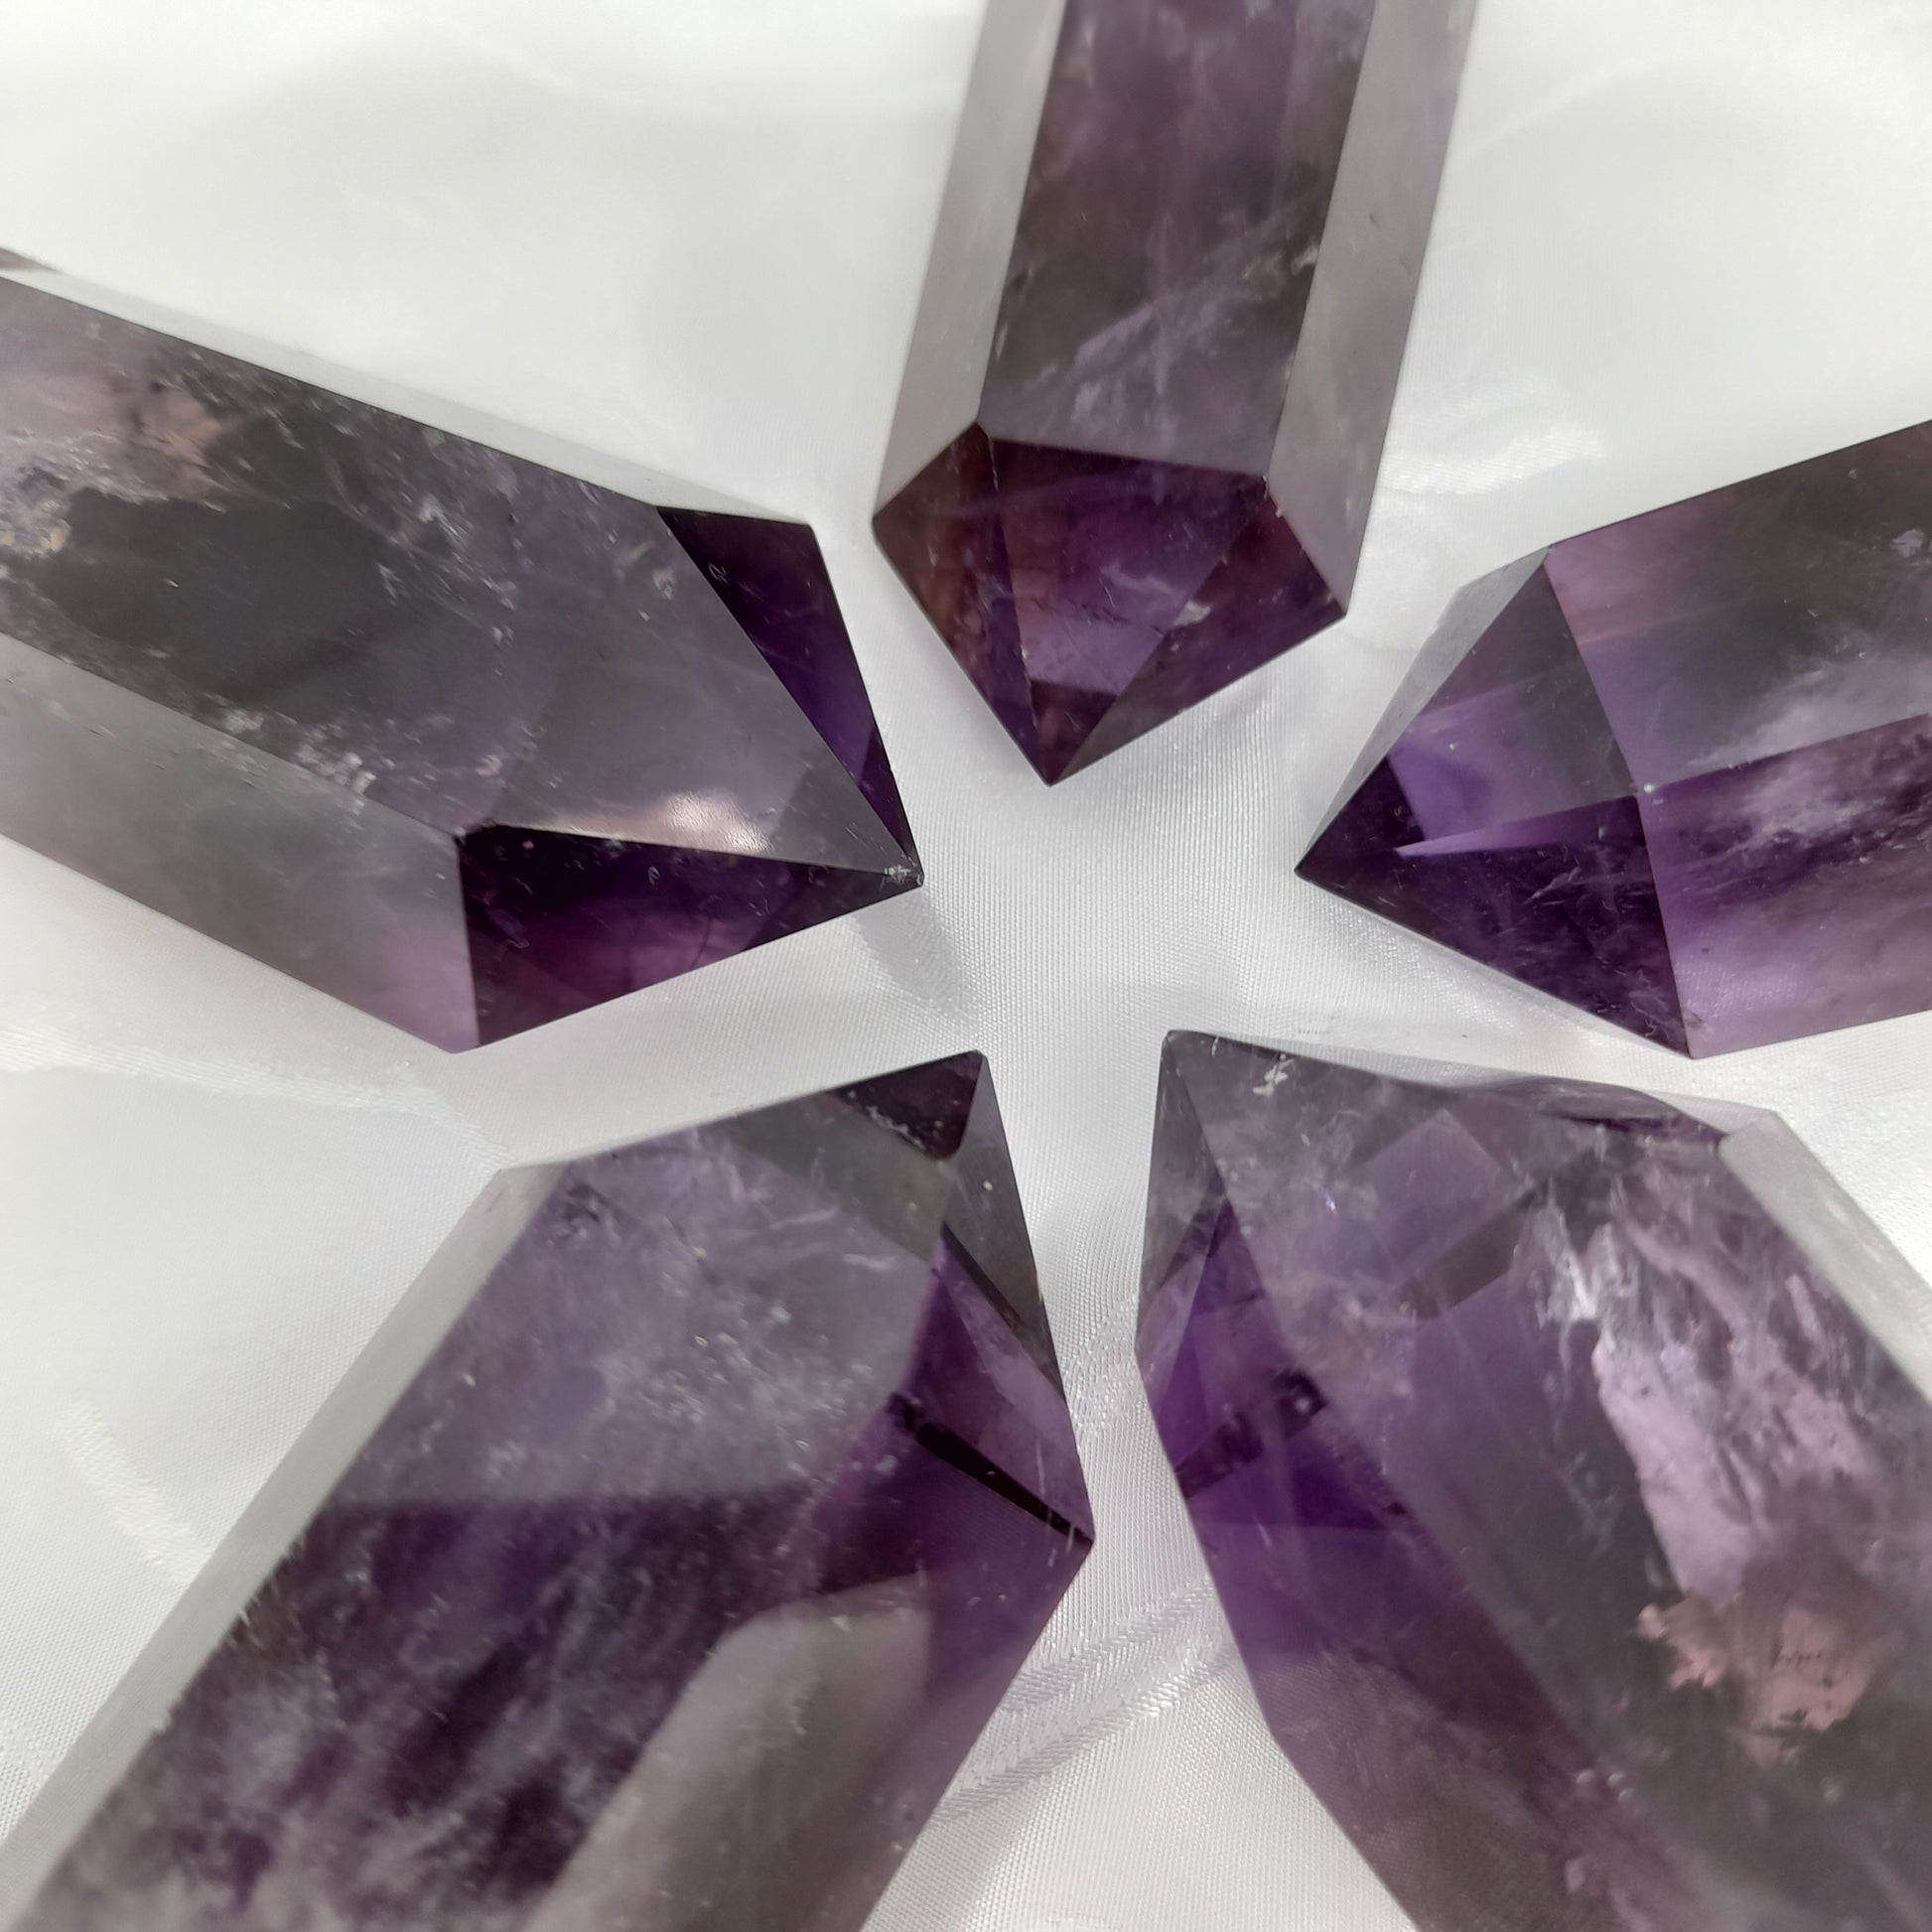 Amethyst Point Crystal - Natural Tranquilizer for Peaceful Sleep, Anxiety Relief, and Calming Effects - Unique 5-7cm Crystal